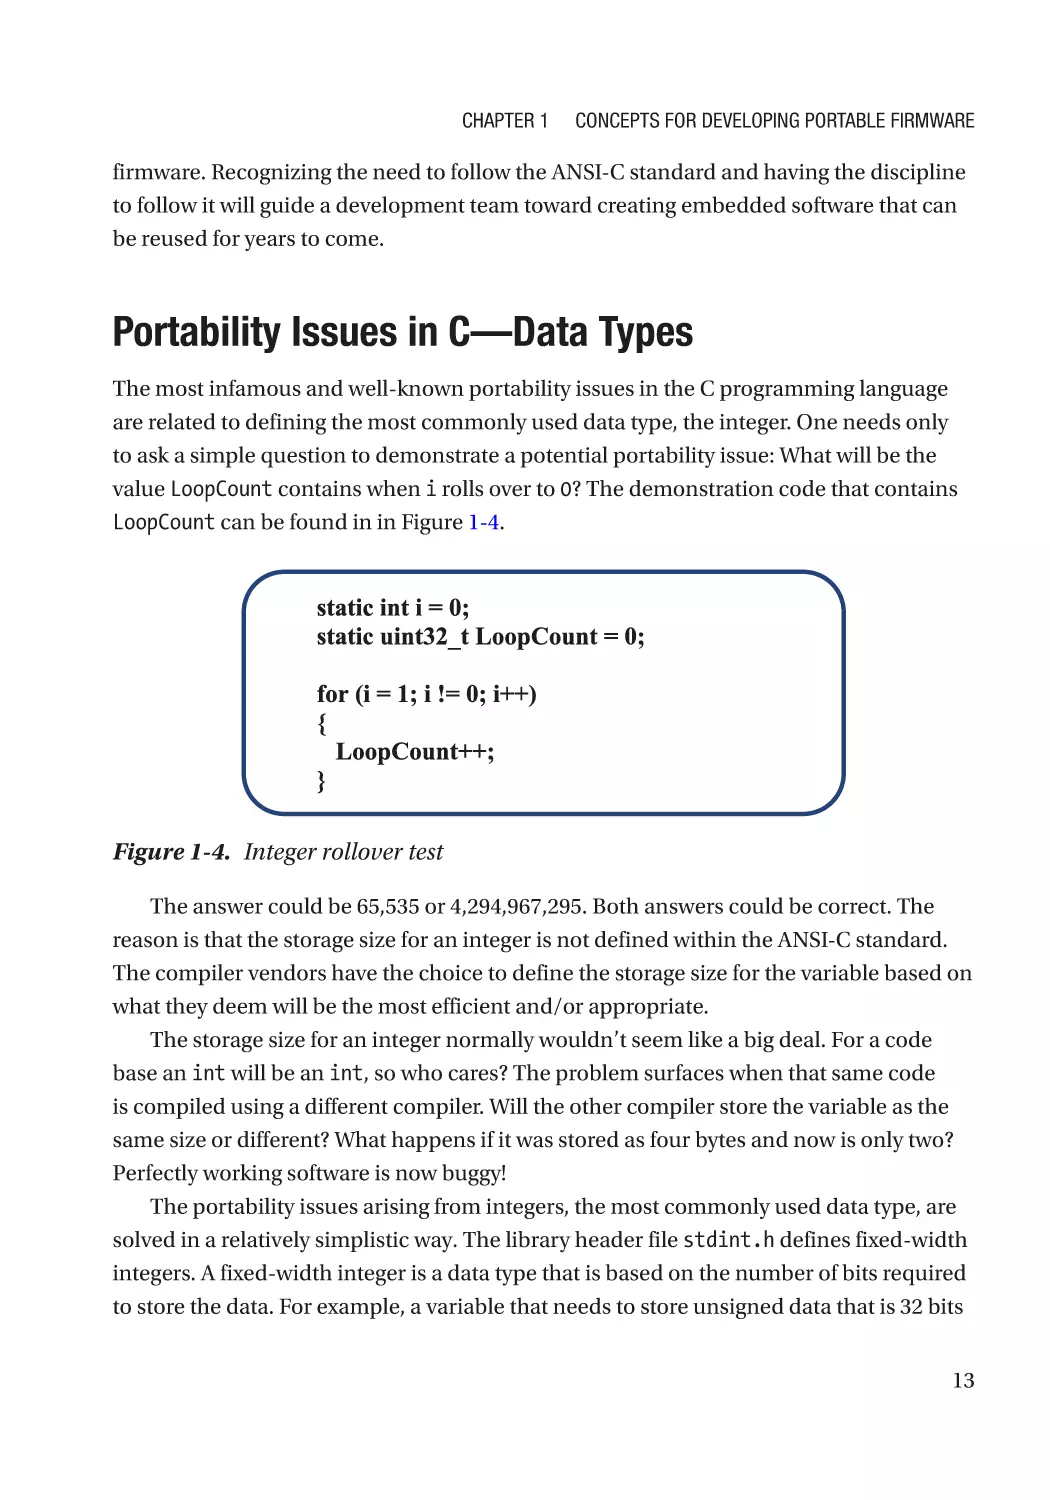 Portability Issues in C—Data Types